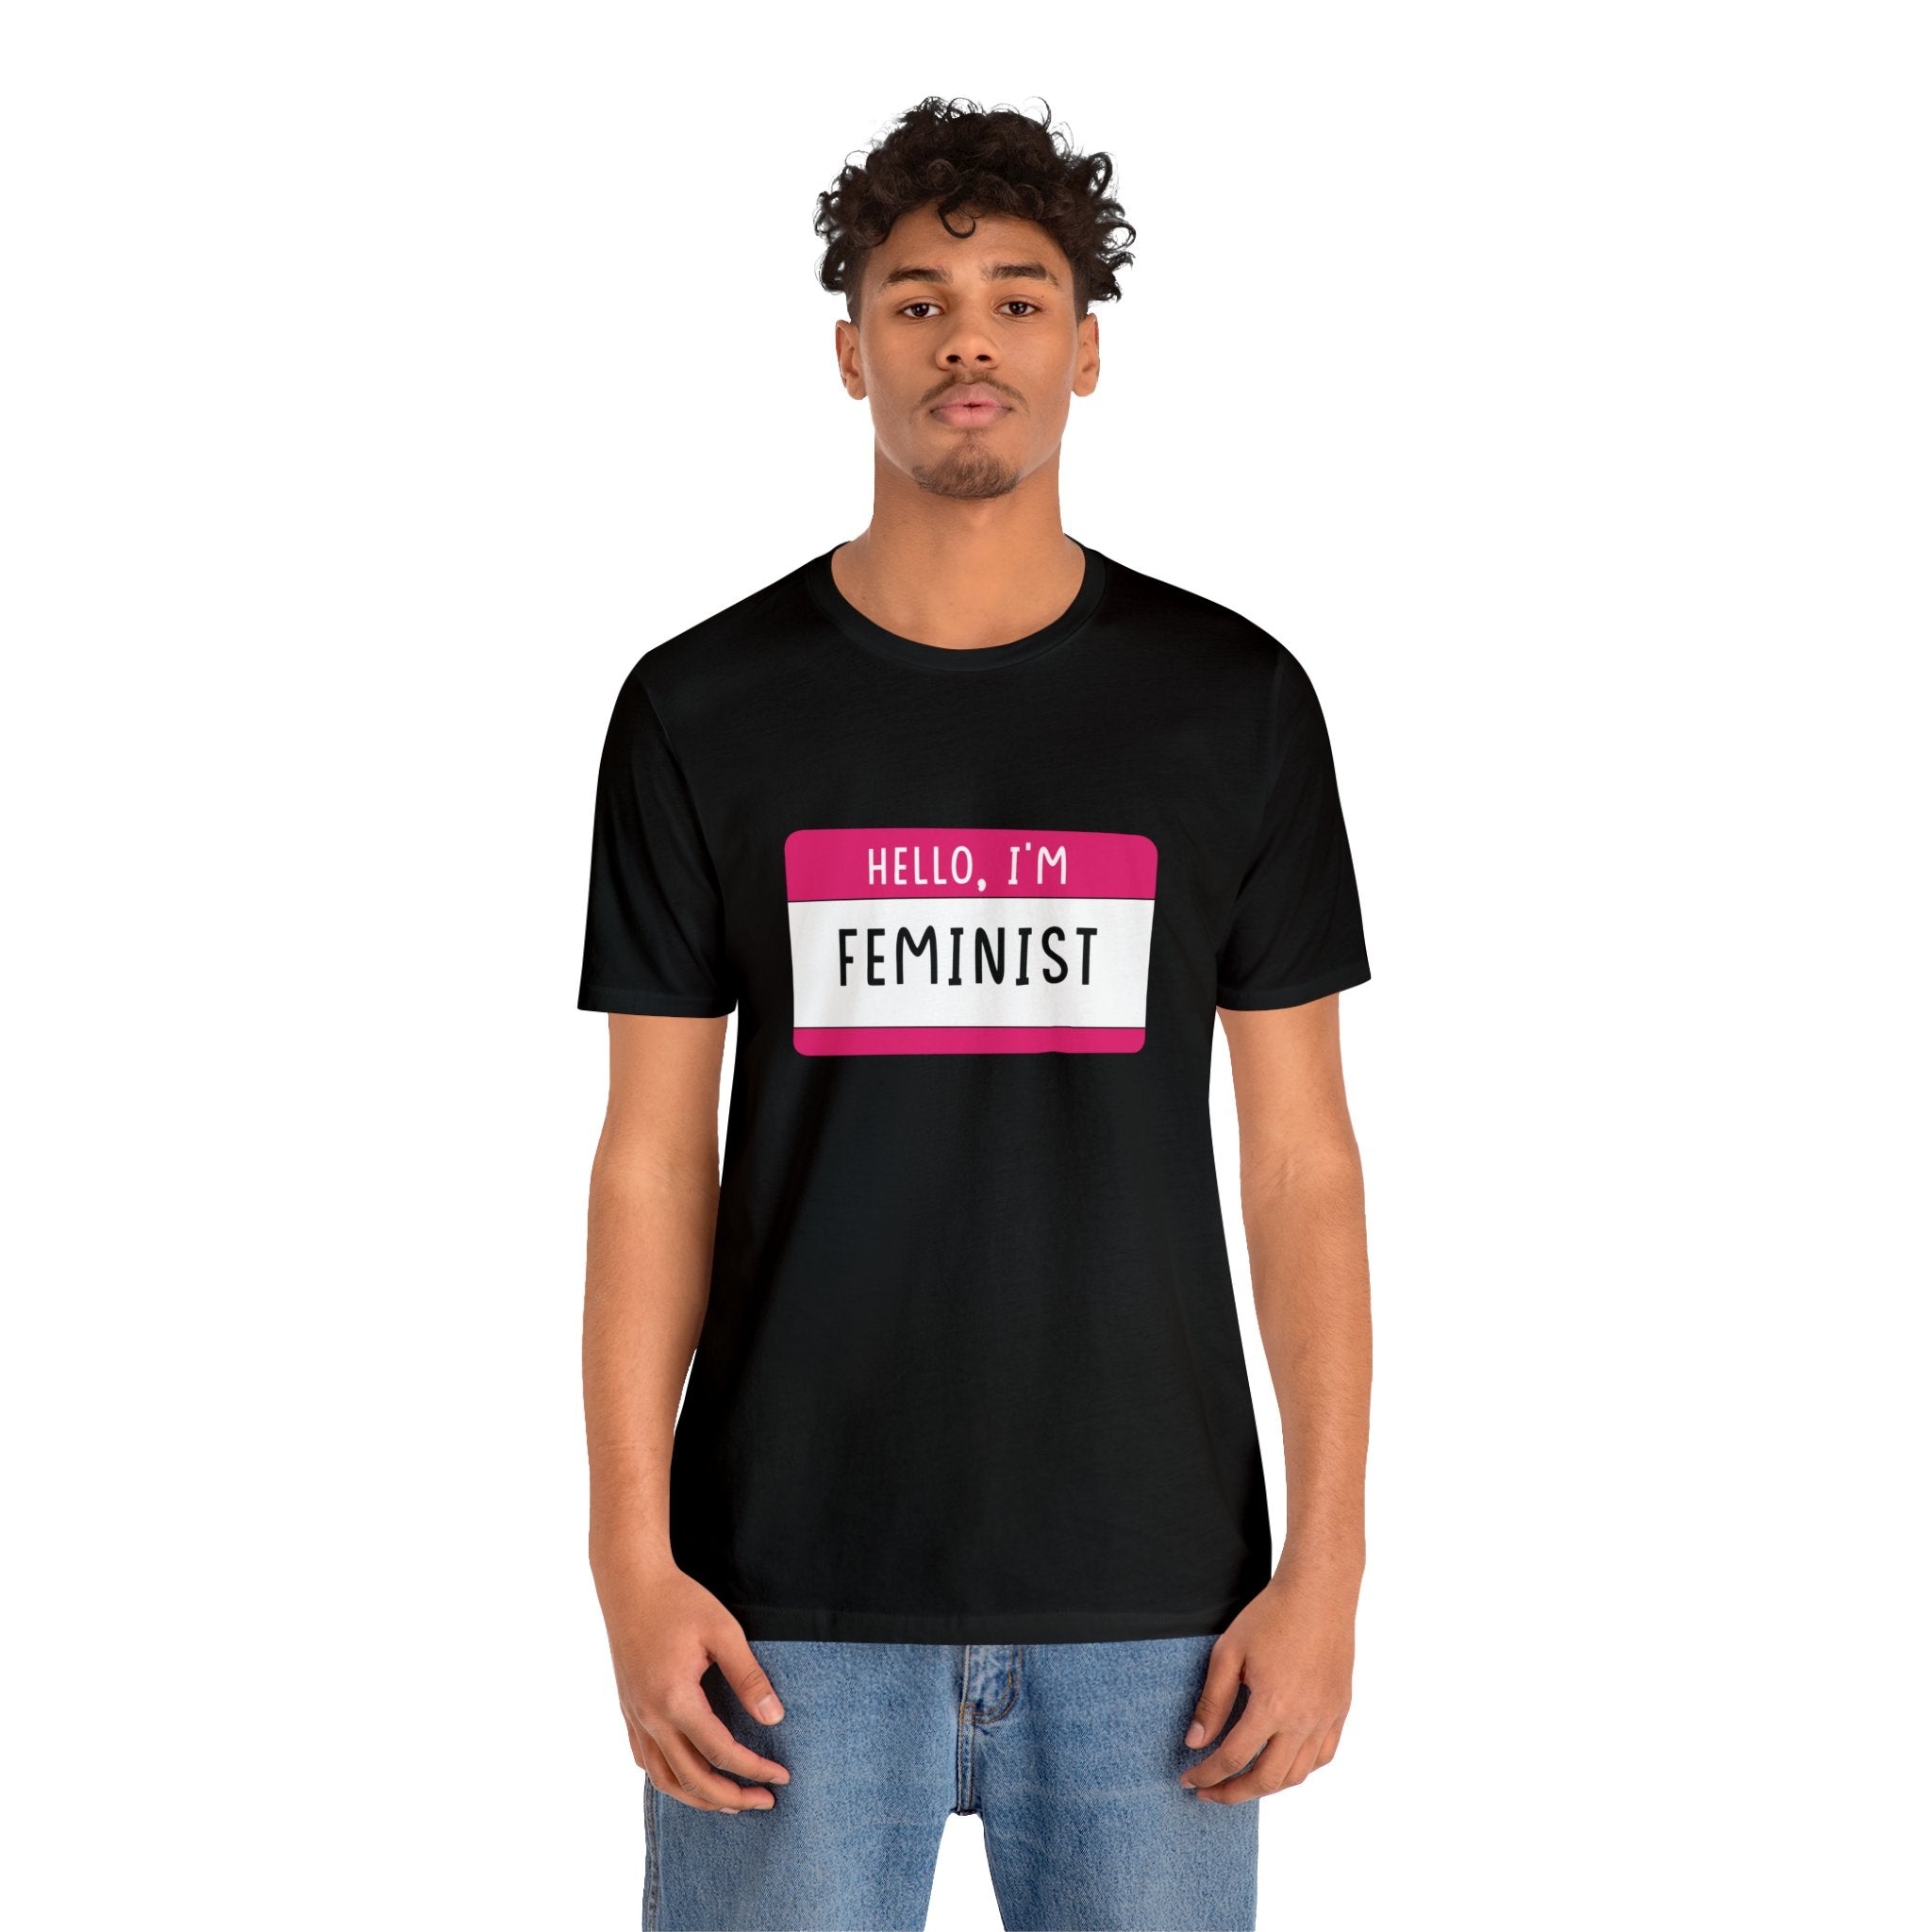 A young man wearing a Hello, I'm Feminist T-Shirt, standing against a white background.